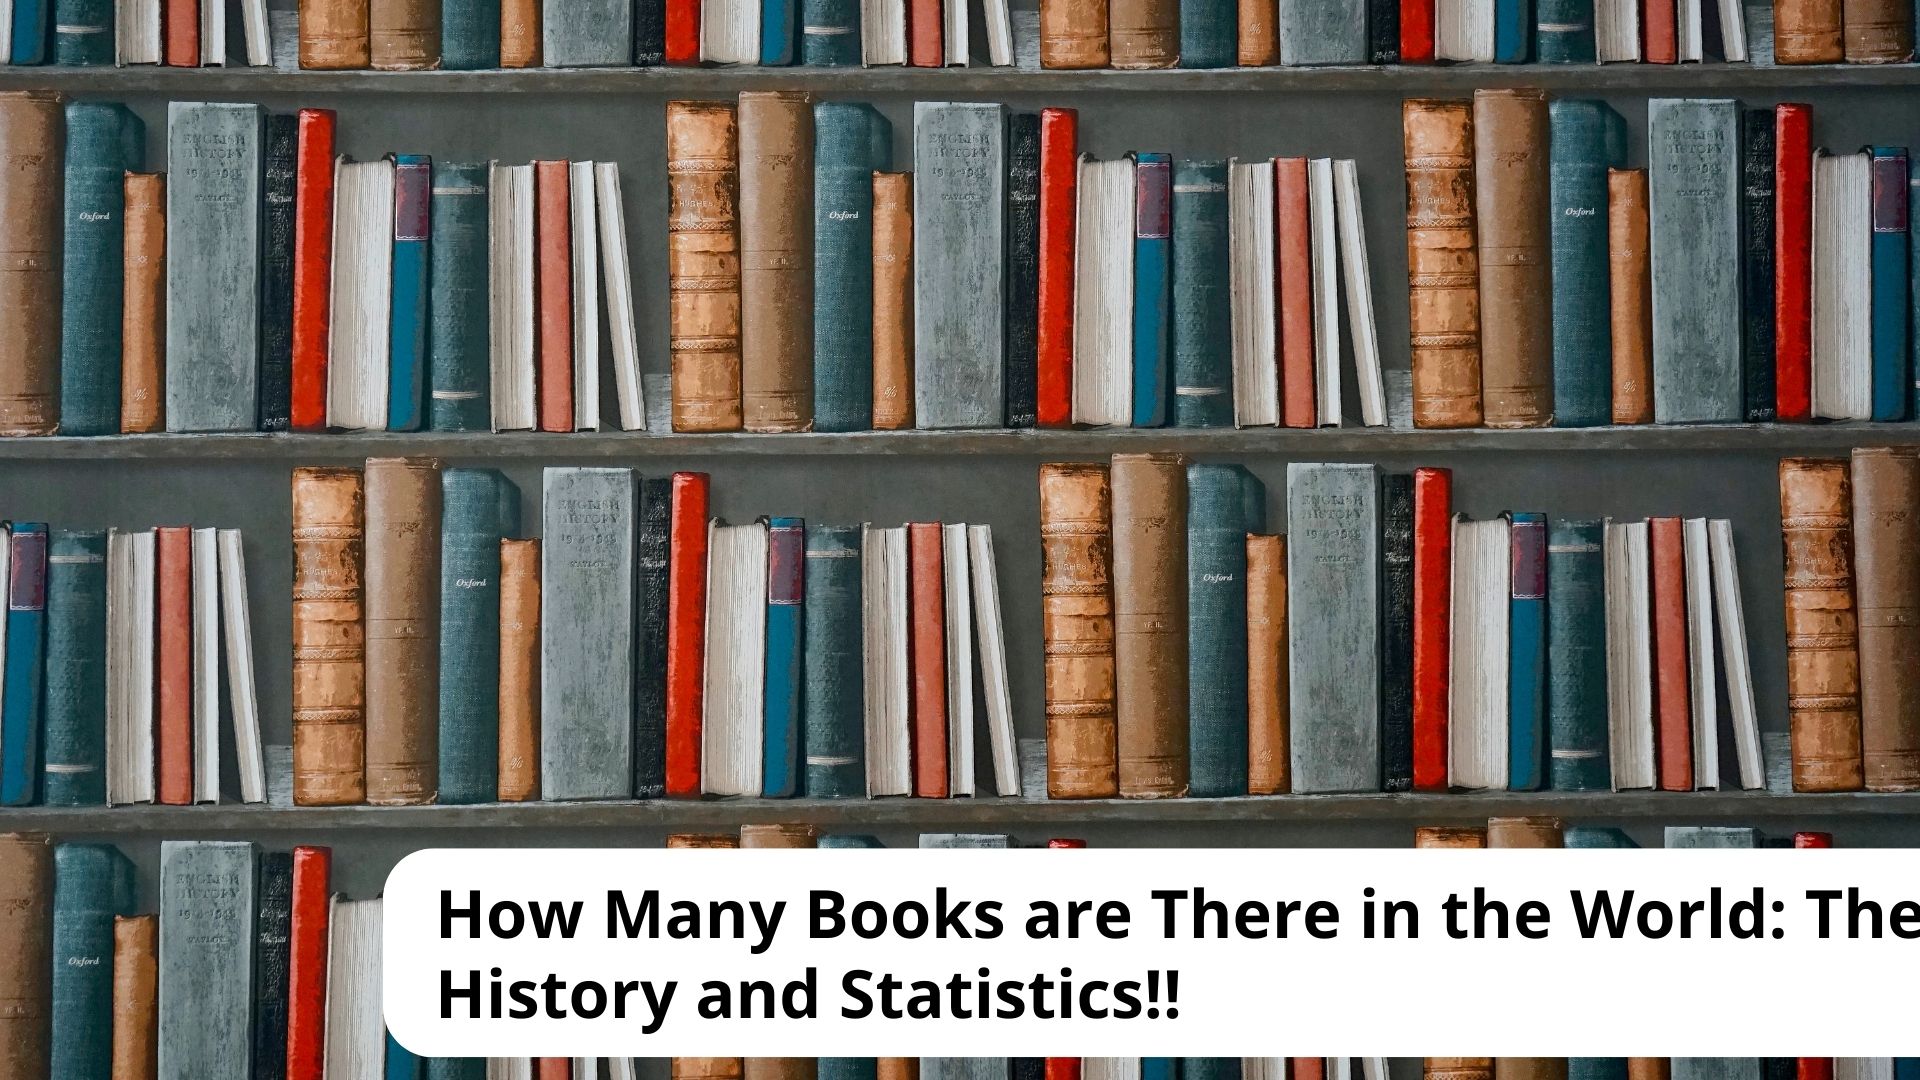 How Many Books are There in the World